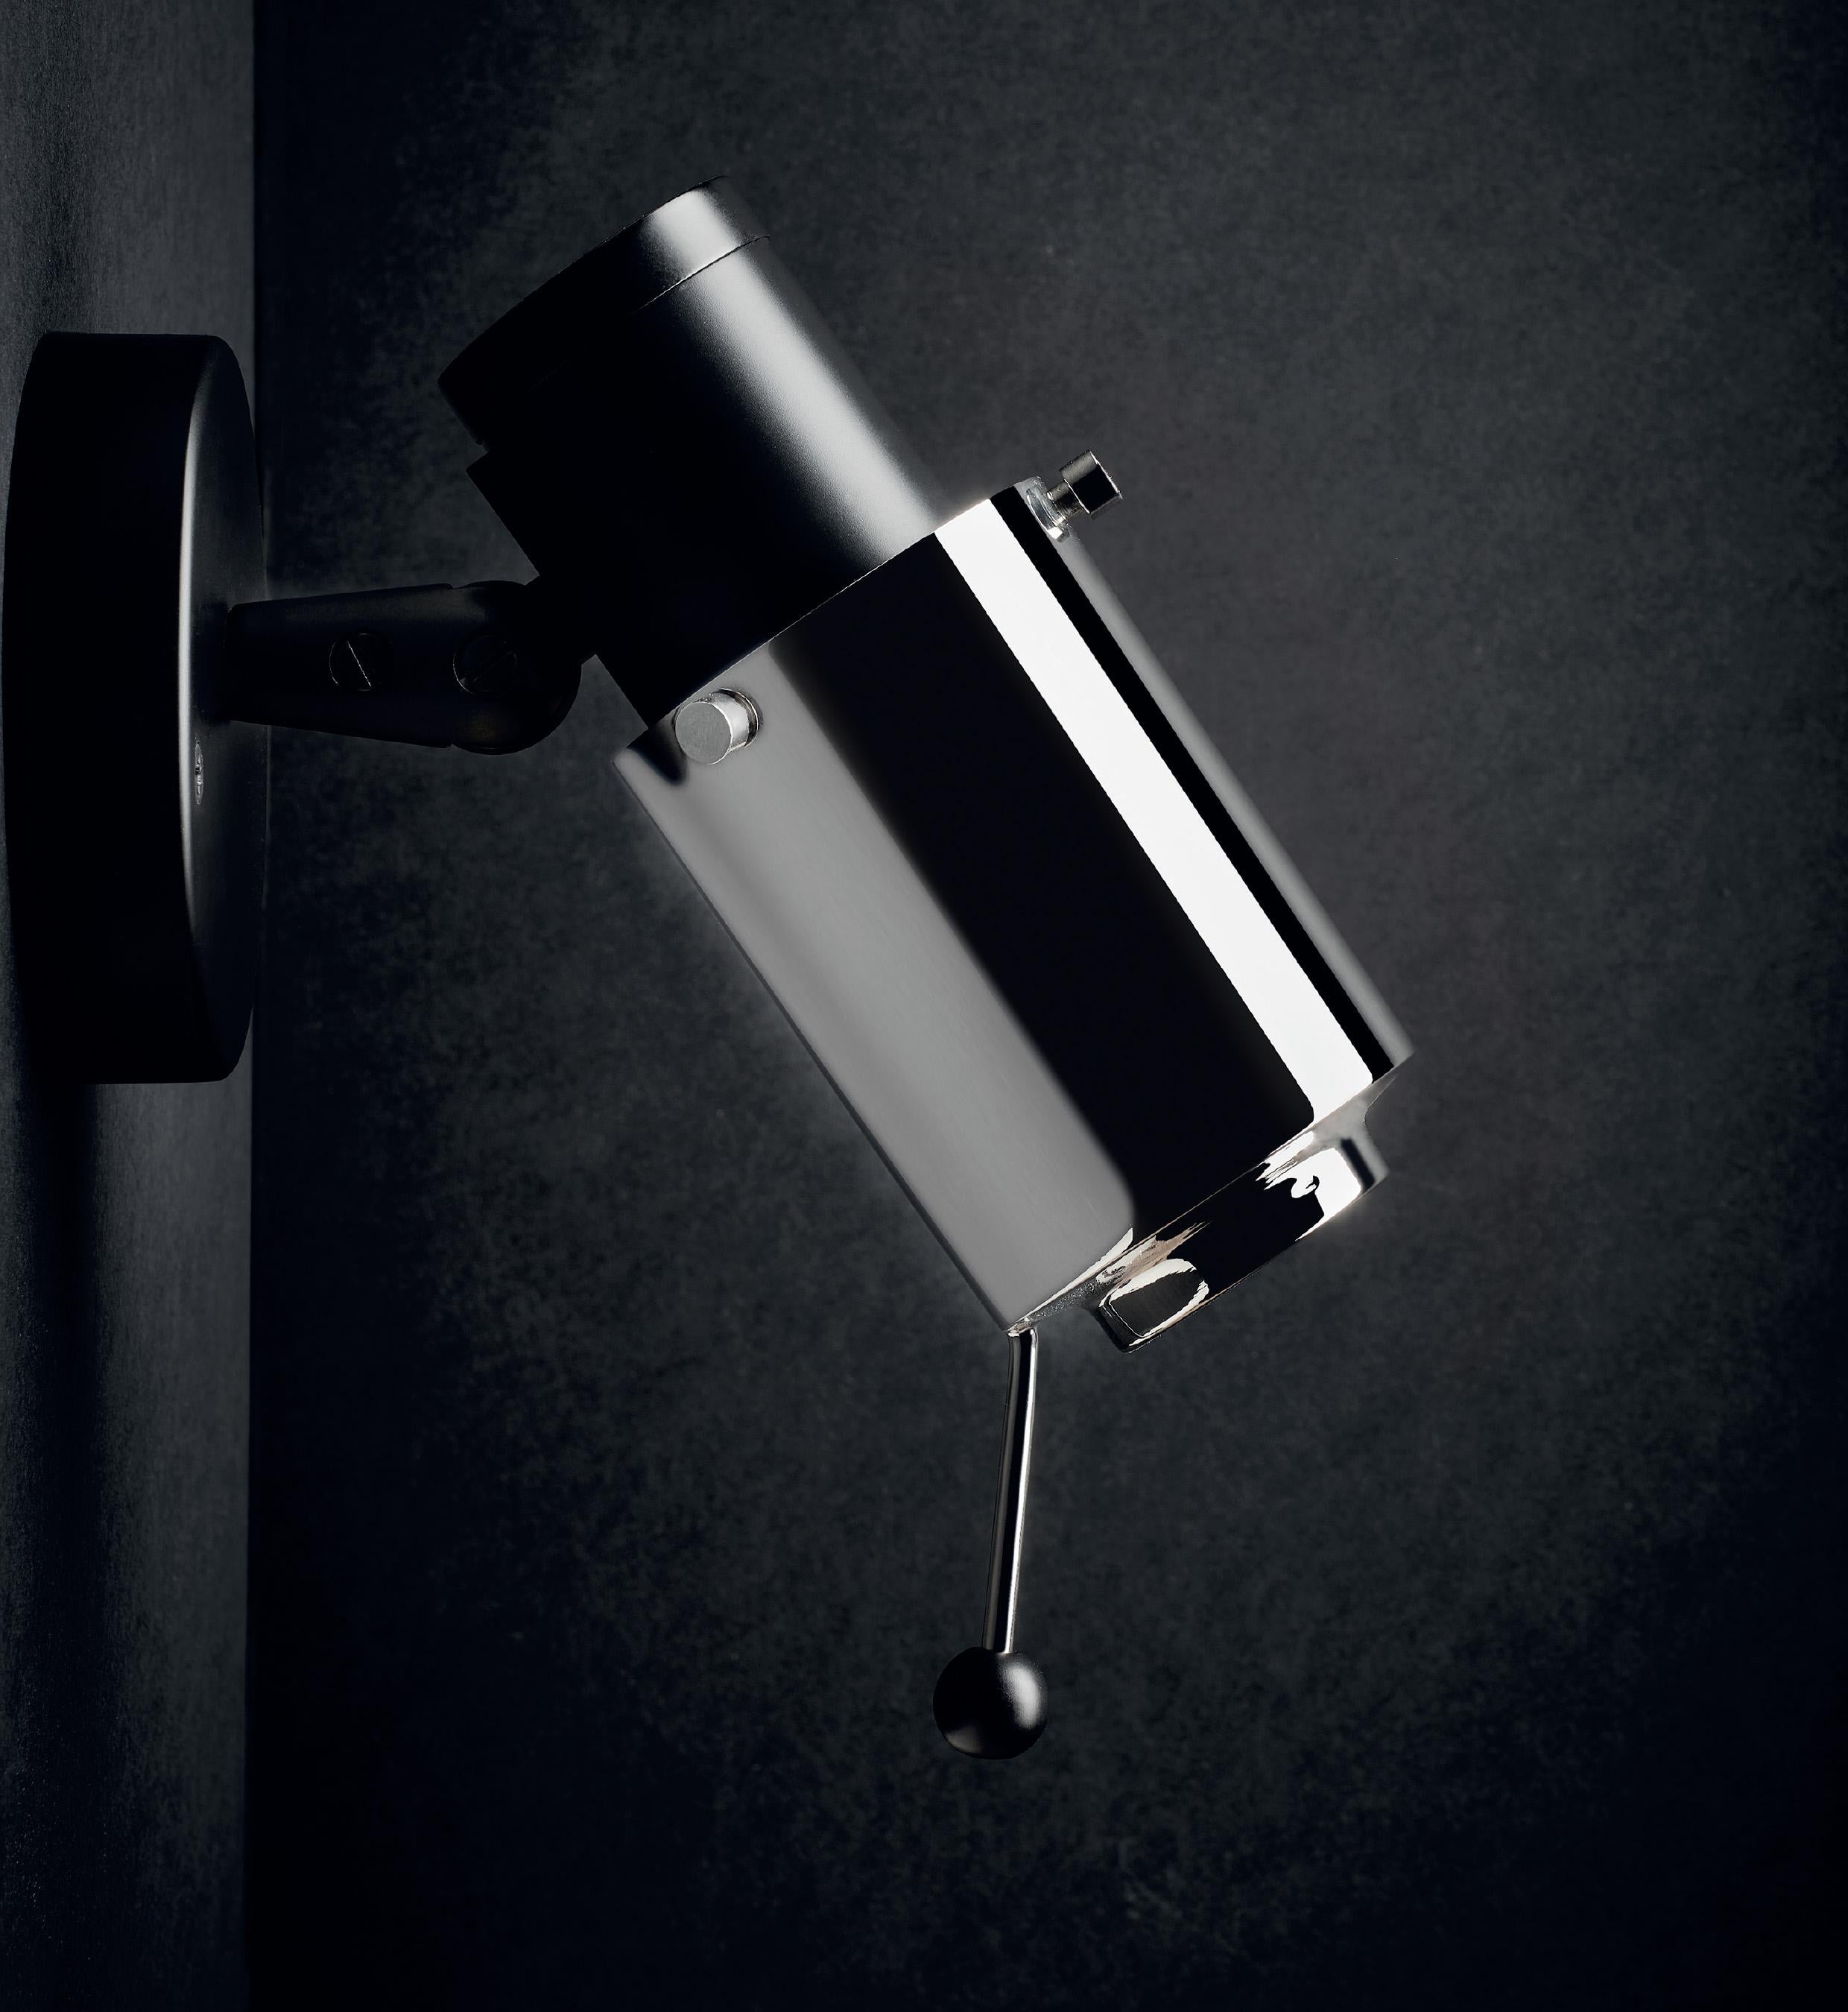 Nickel Biny spot wall lamp by Jacques Biny
Dimensions: D 19.8 x W 6.5 x H 15 cm
Materials: Aluminum, steel
Also available: Different colors, with or without switch, with or without stick, led or bulb version.

All our lamps can be wired